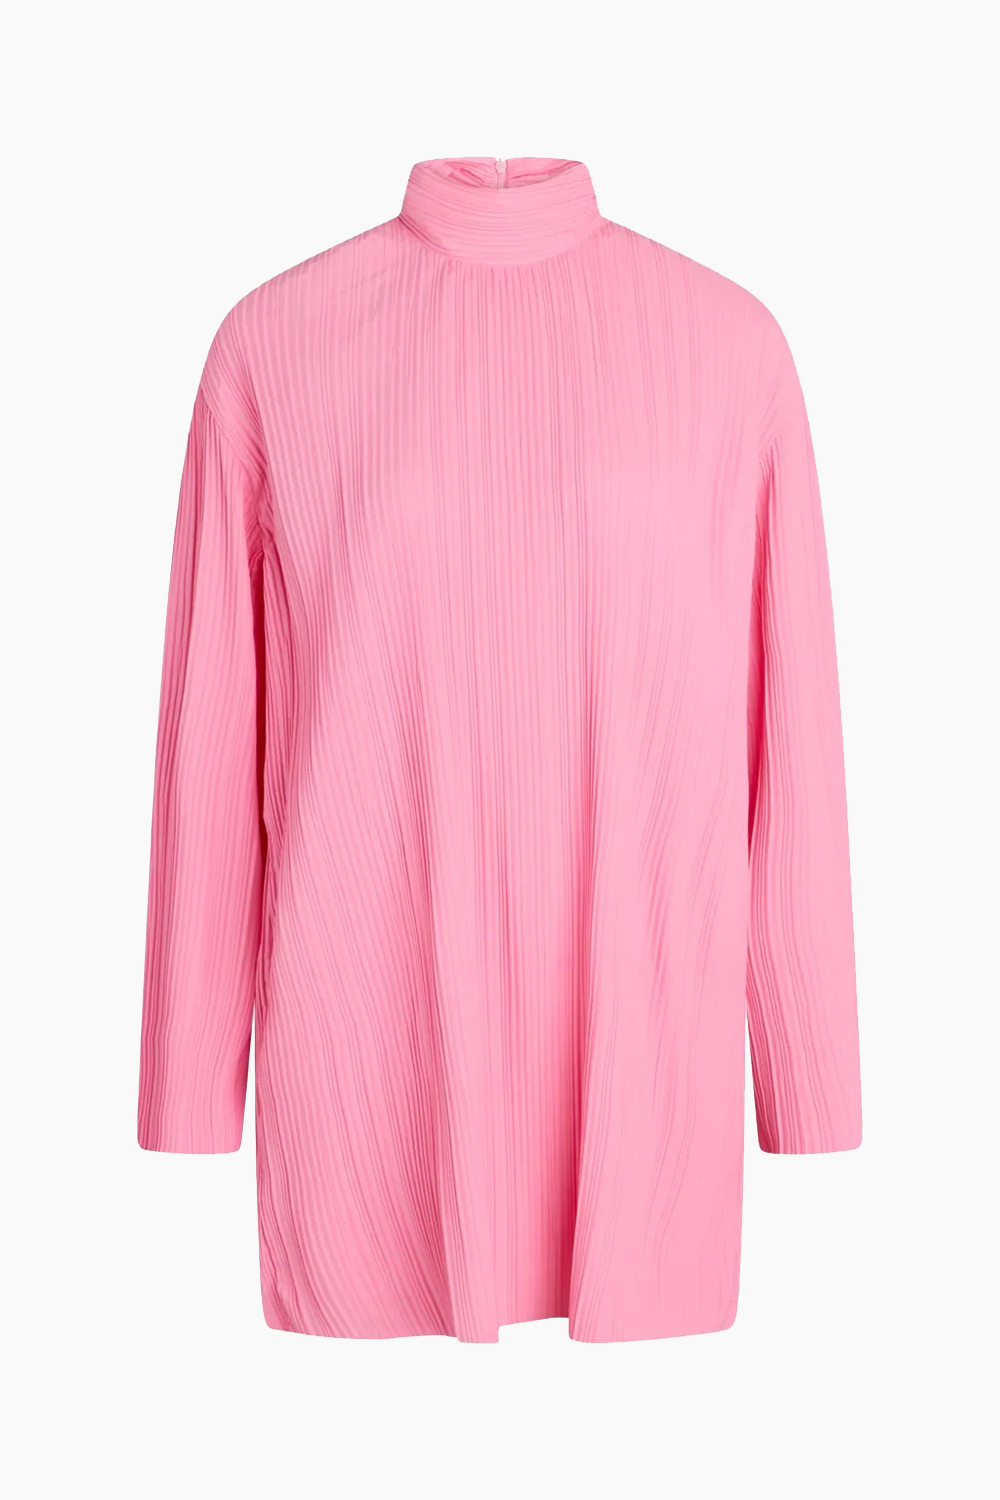 10: Paper Pleat Hausach Dress - Cotton Candy - Mads Nørgaard - Pink L